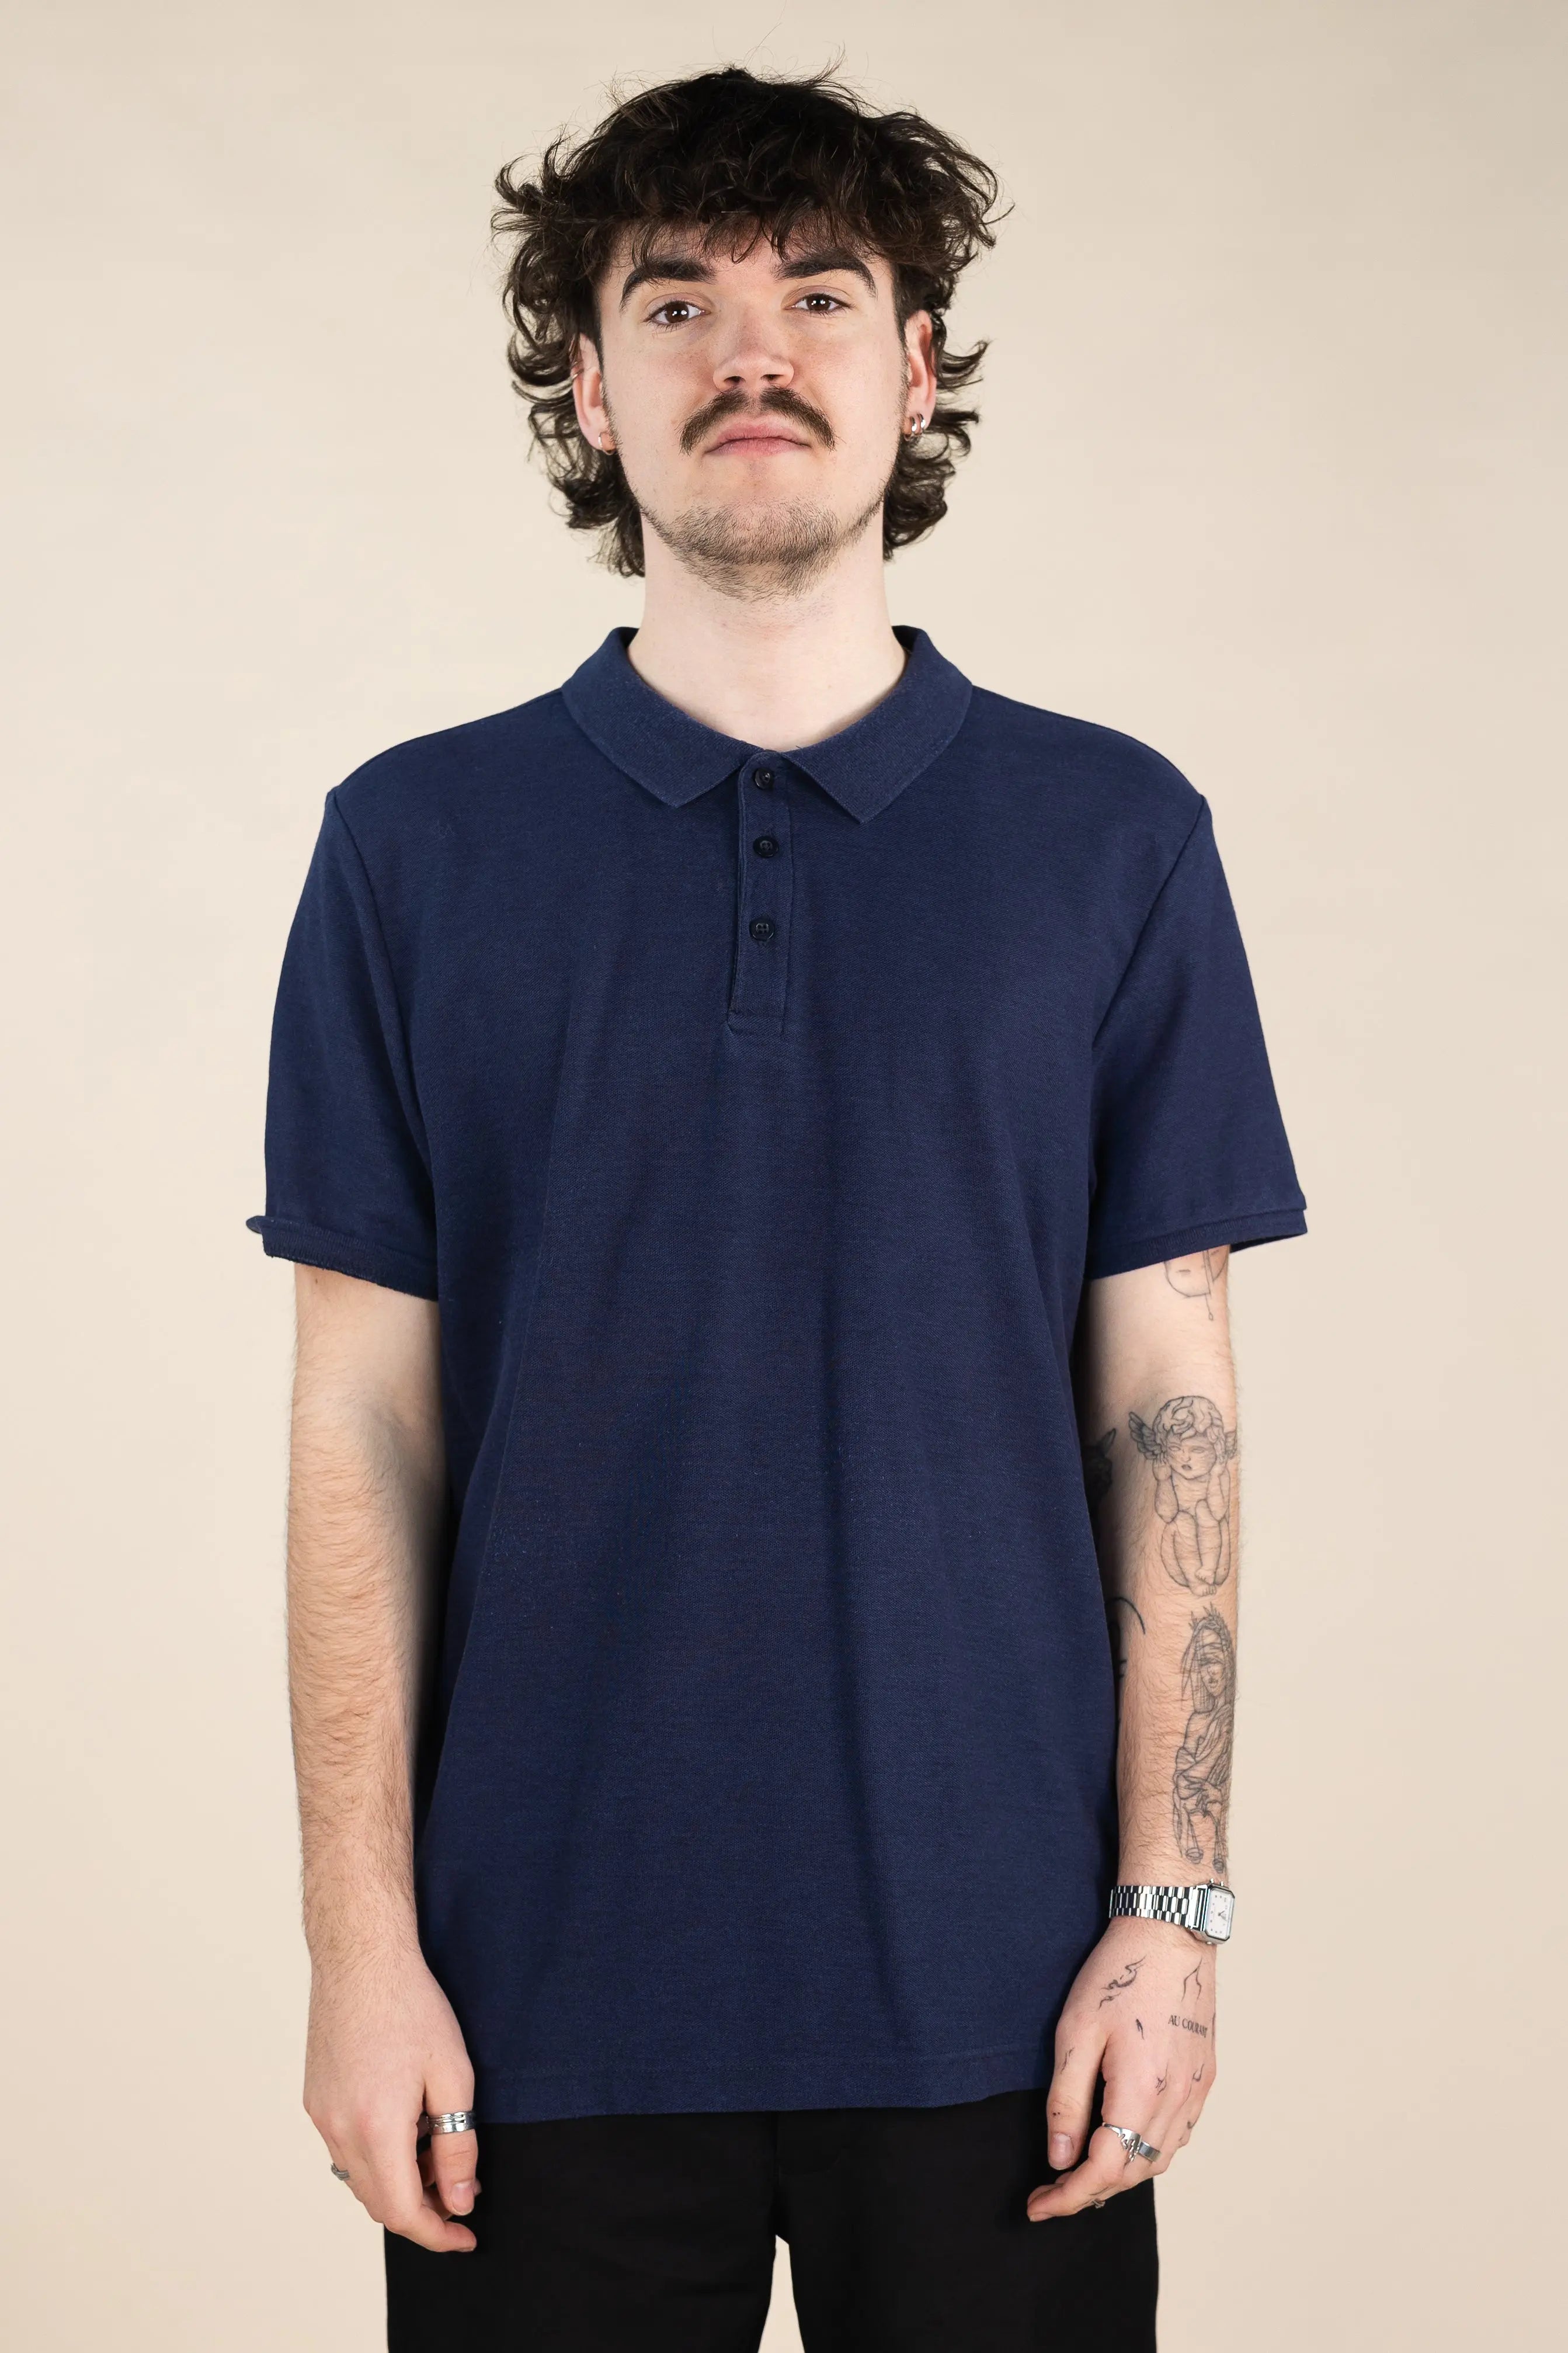 HEMA - Polo Shirt- ThriftTale.com - Vintage and second handclothing